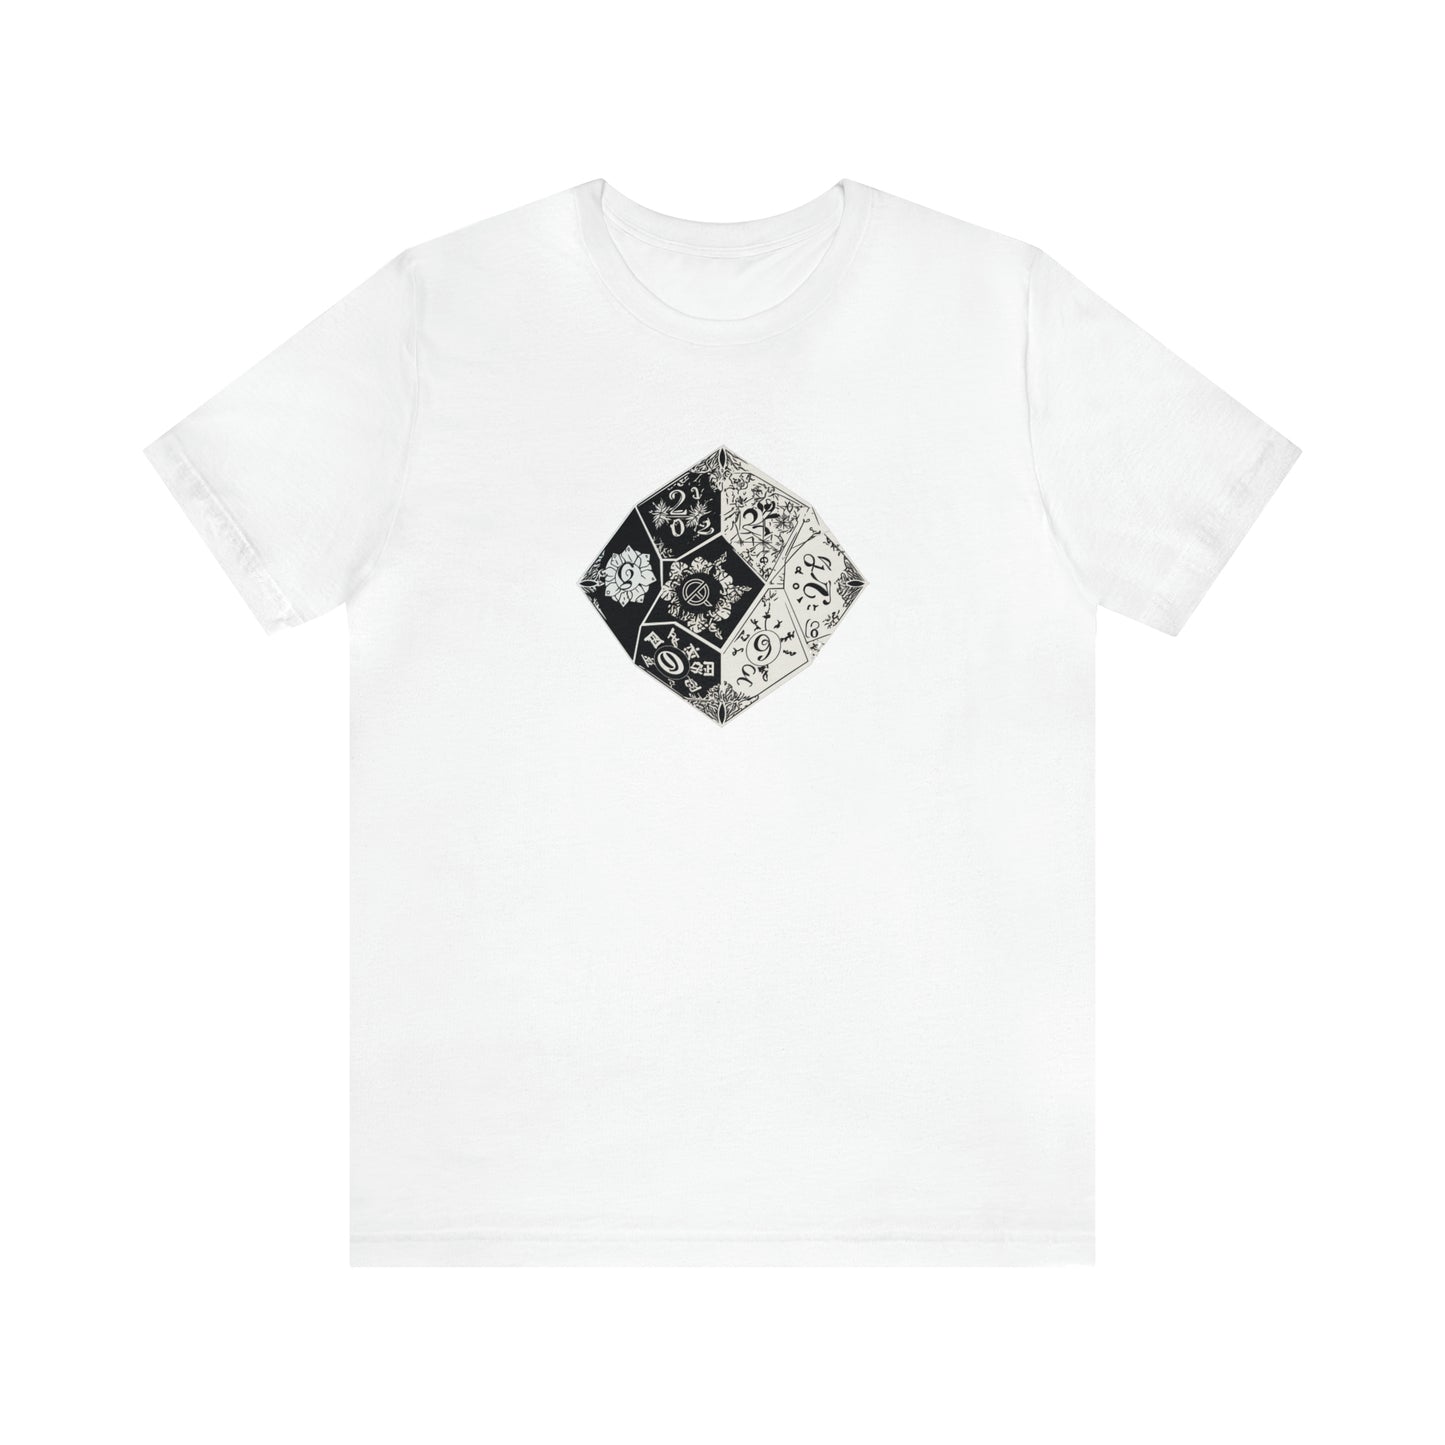 white-quest-thread-tee-shirt-with-large-black-and-white-artistic-dice-on-center